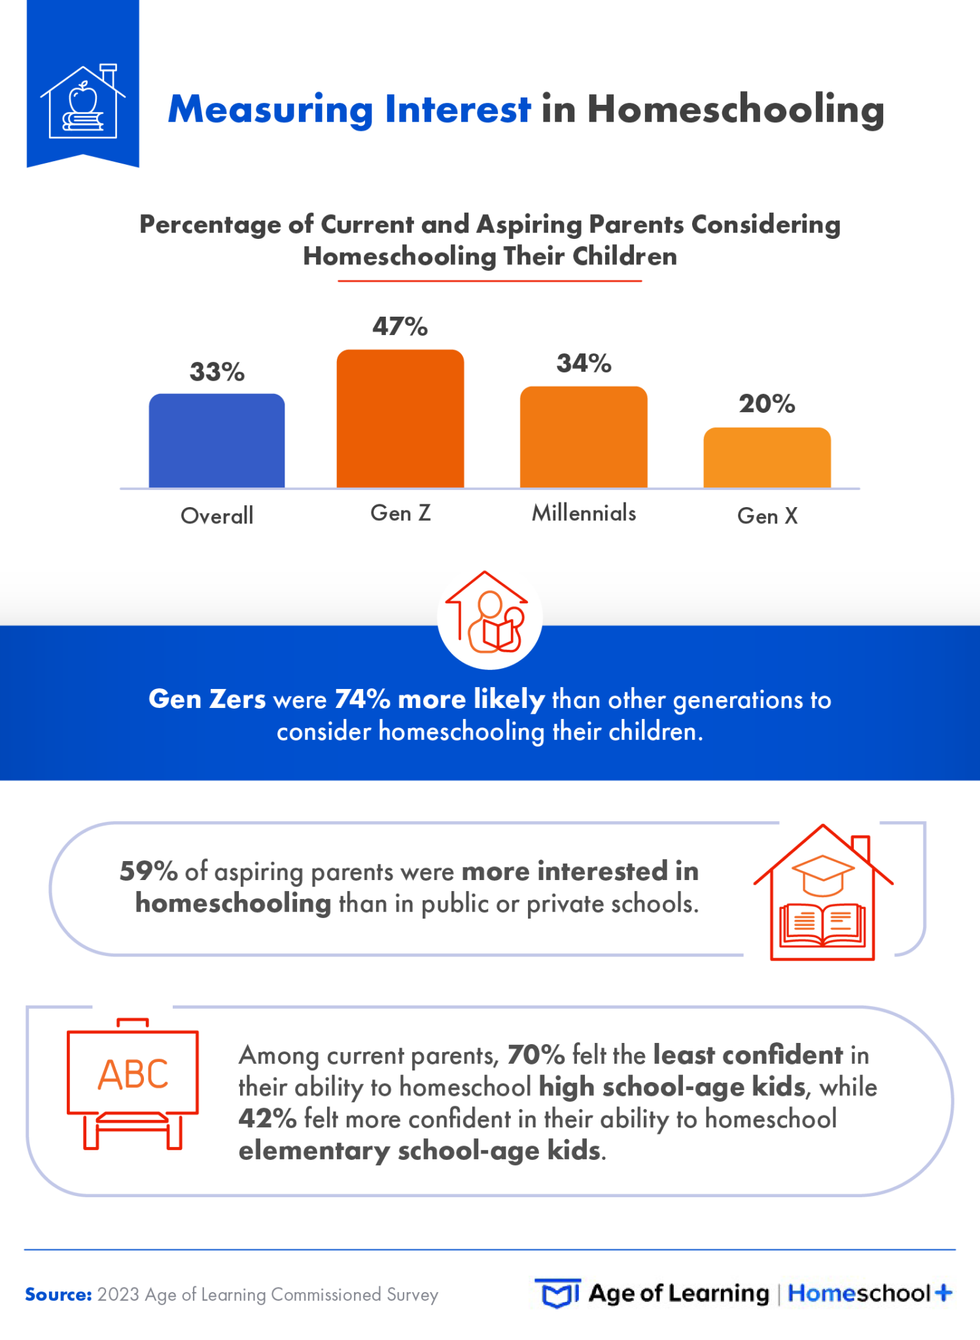 Statistics about homeschooling interest from Age of learning survey